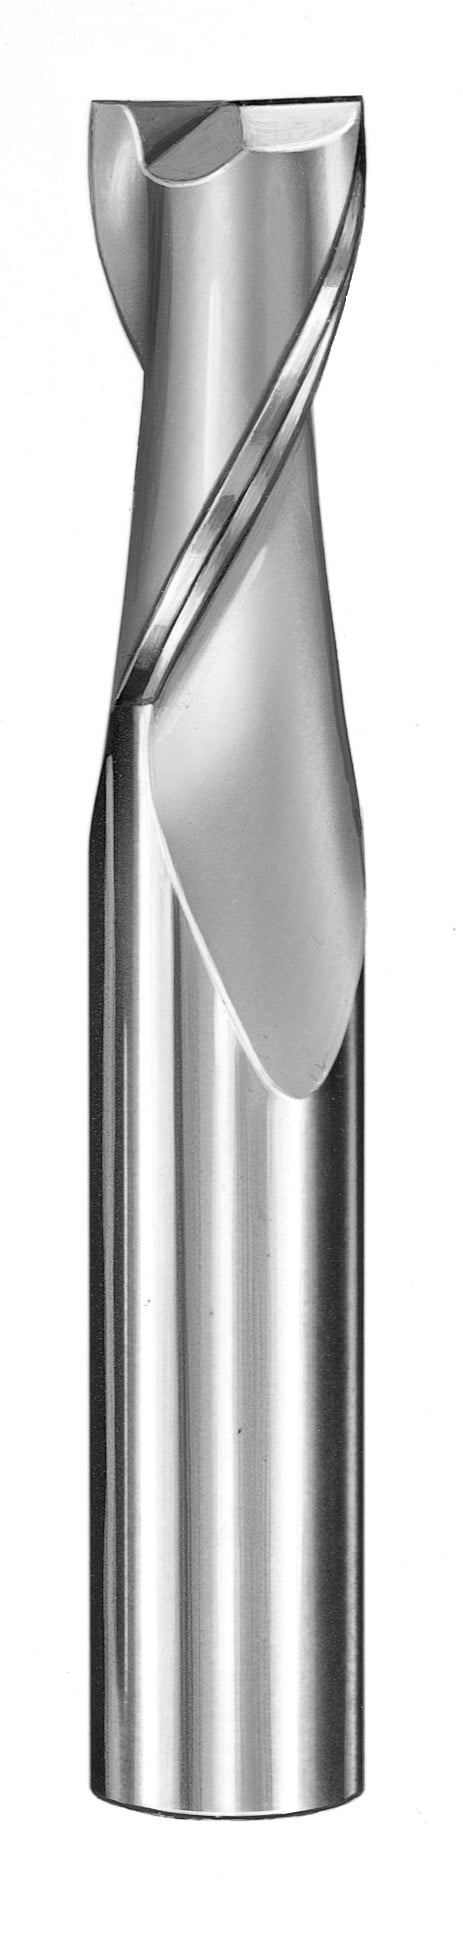 15/32" Dia, 2 Flute, Square End End Mill - 30359